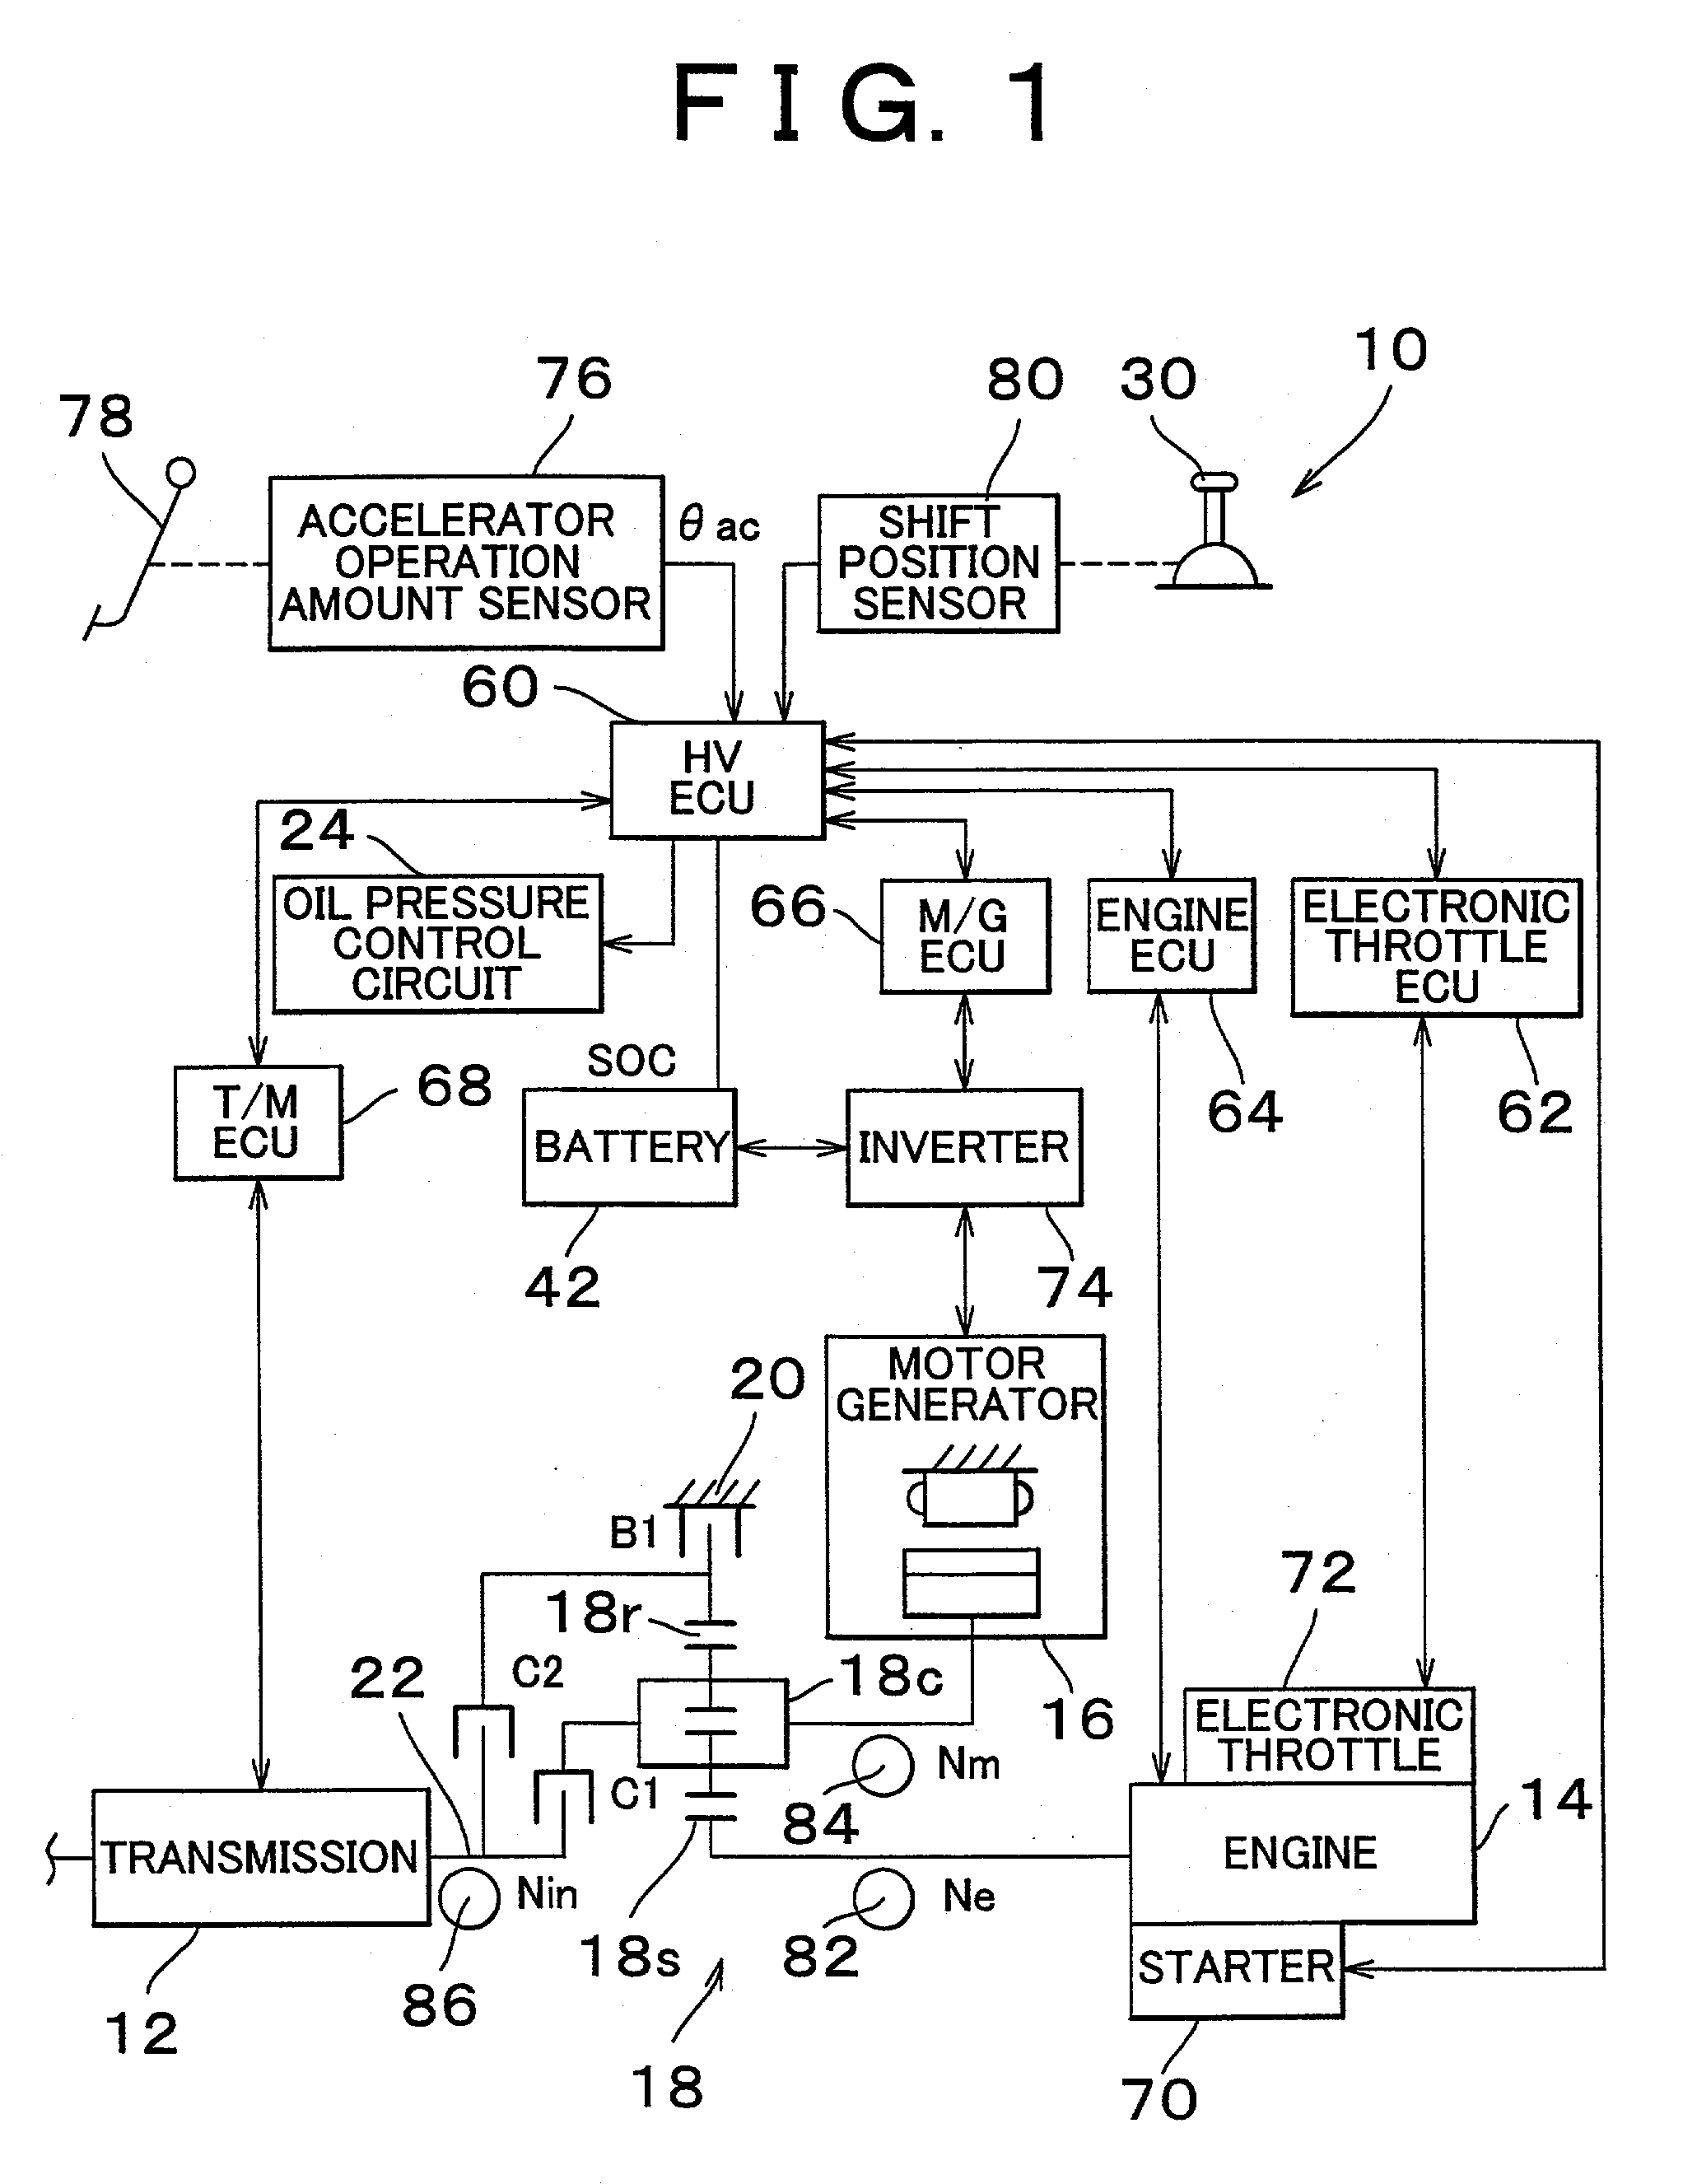 Vehicle drive control apparatus and method